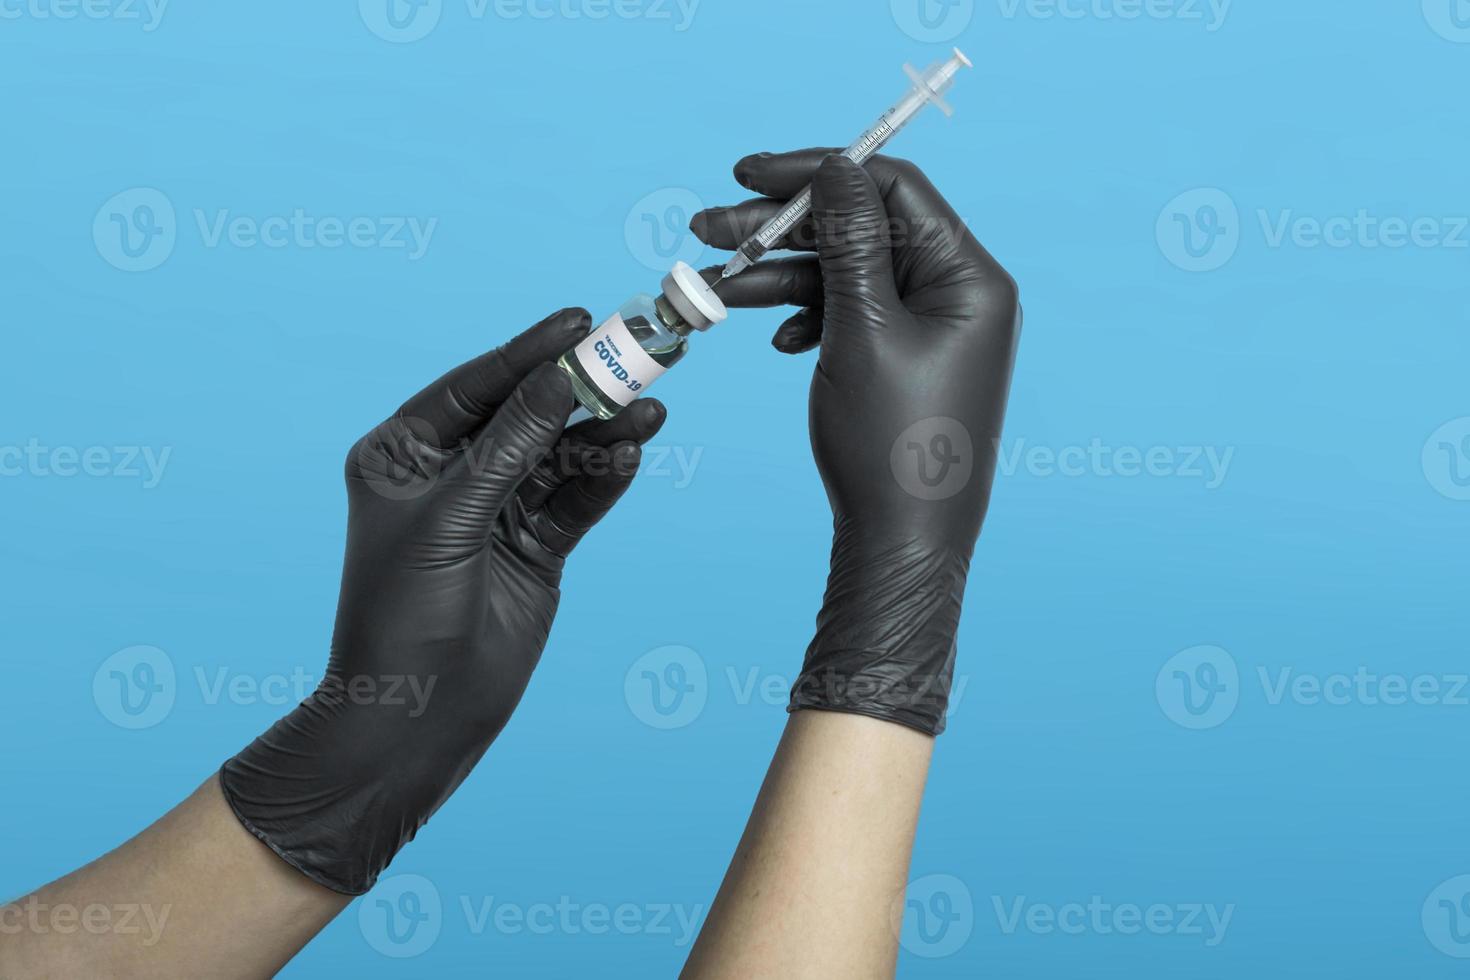 Vaccination concept. Development and creation of a vaccine against coronavirus. Medical concept over blue background. Doctor's hands in black medical gloves with a syringe and COVID-19 vaccine. photo